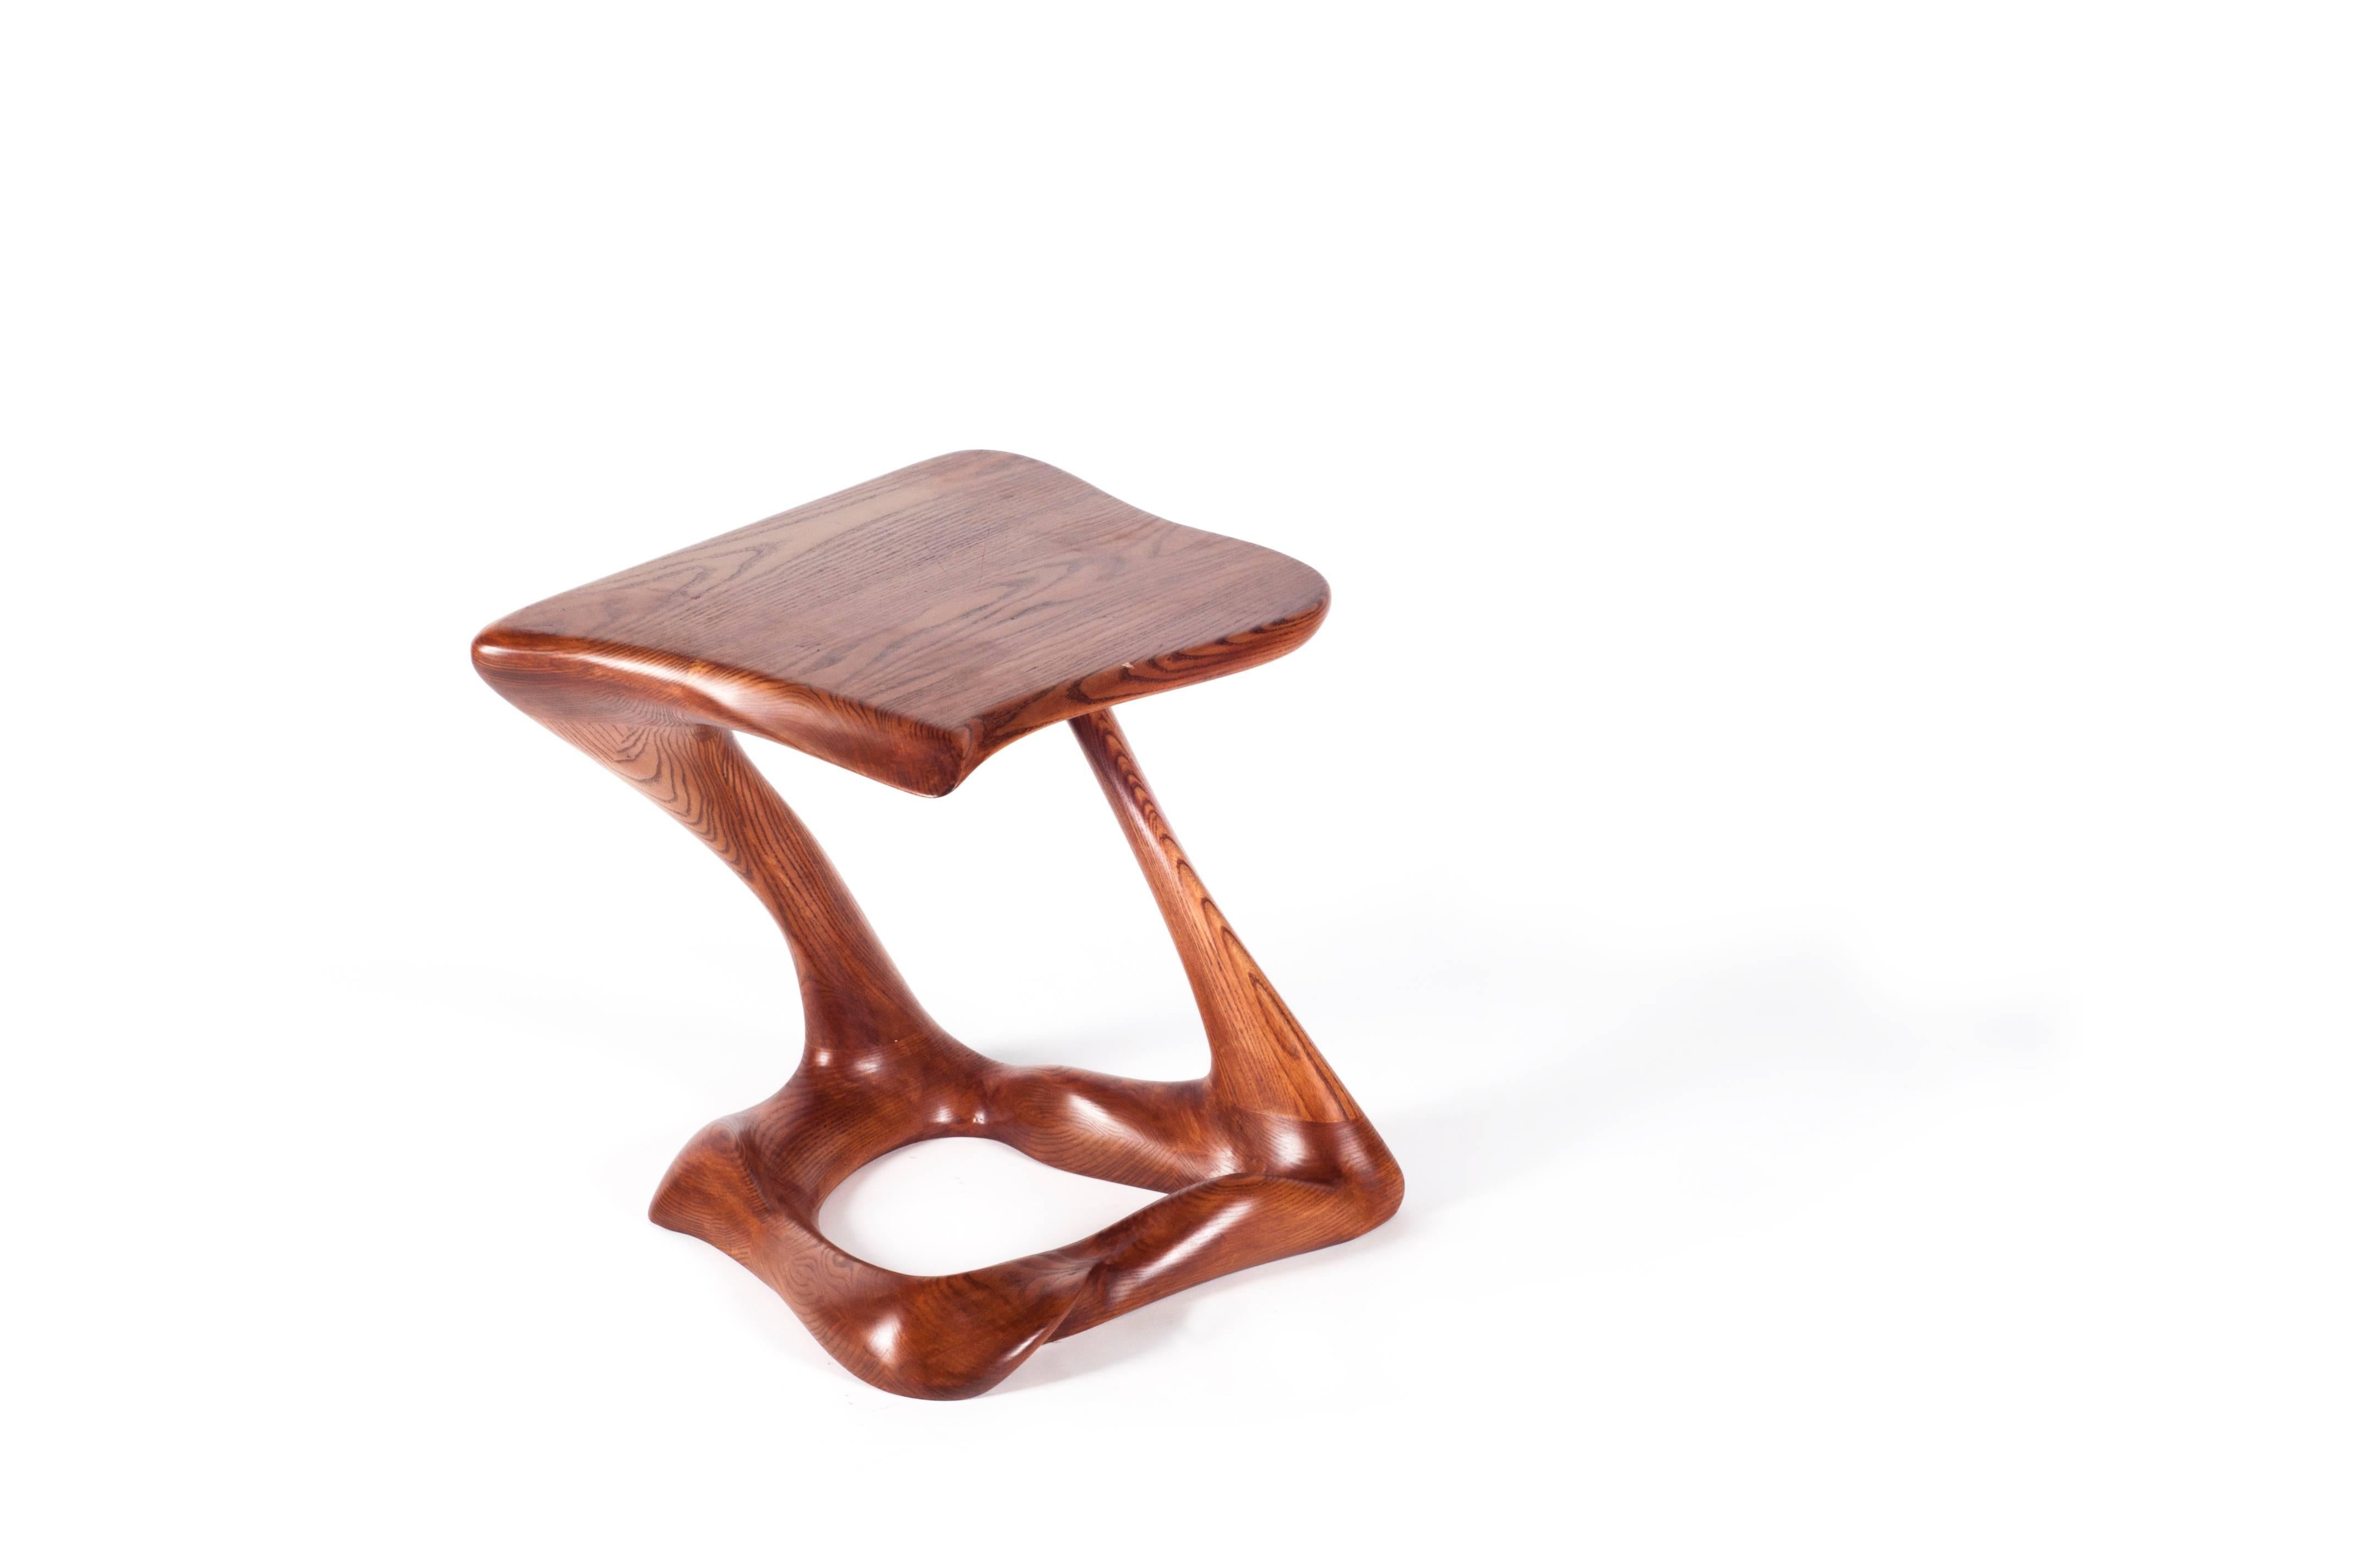 Side table (Tryst) is a stylish futuristic sculptural art table with a dynamic. Tryst could be fitted in modern homes or offices featuring as a contemporary style art piece. Tryst is made out of solid ash wood with dark walnut stain. By the nature,